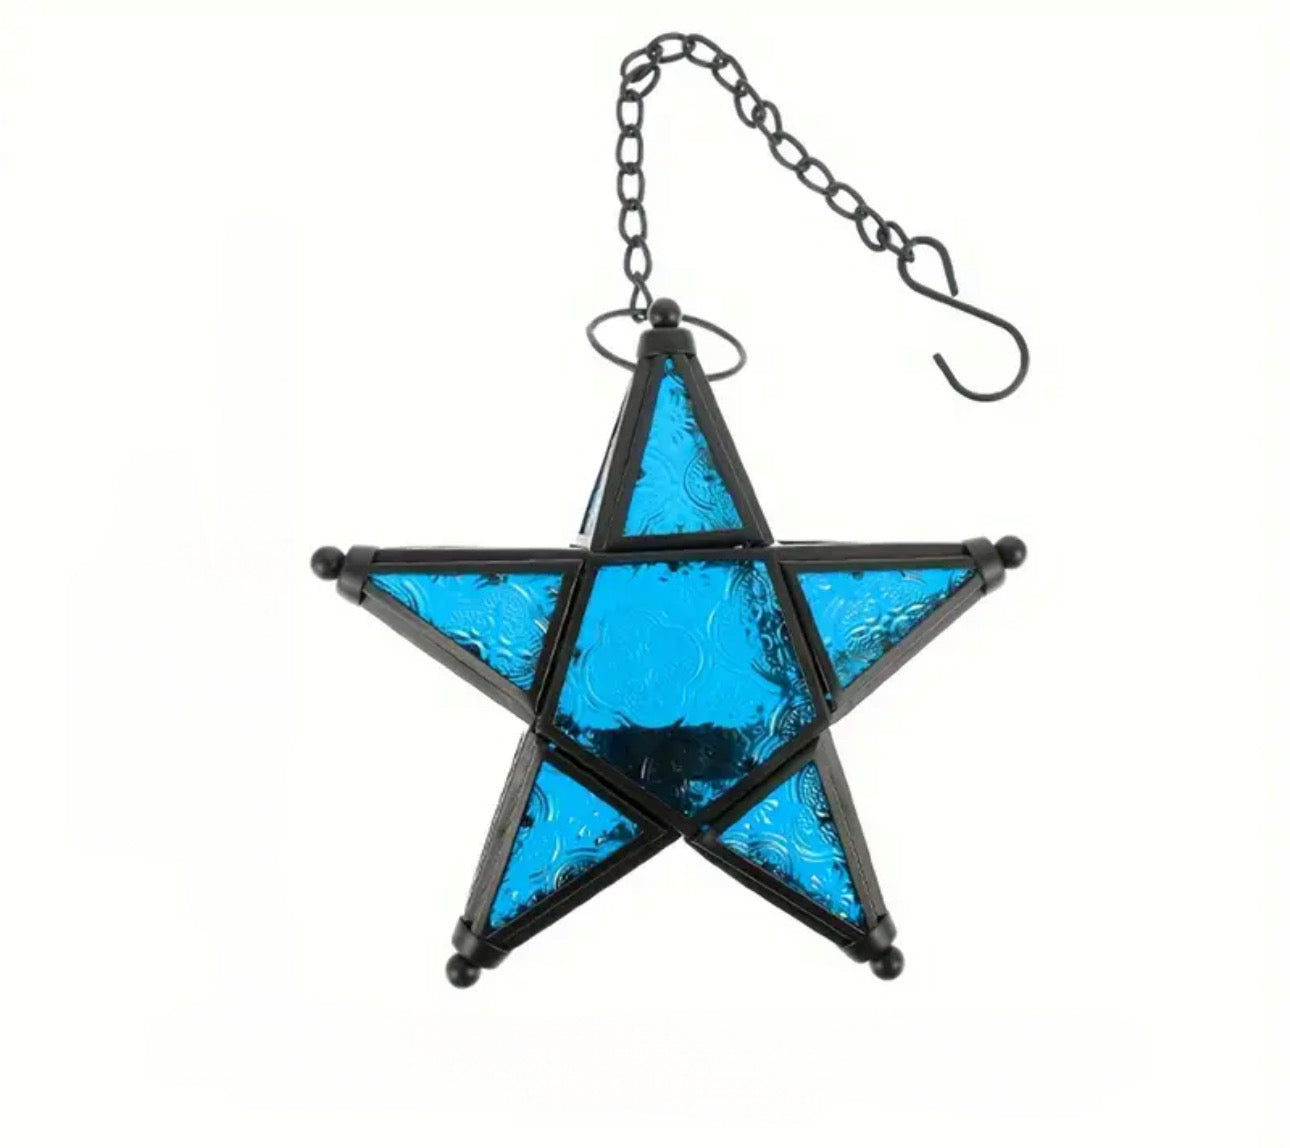 Stained Glass Star Candle Holders — 7.32 inches by 7.75 inches